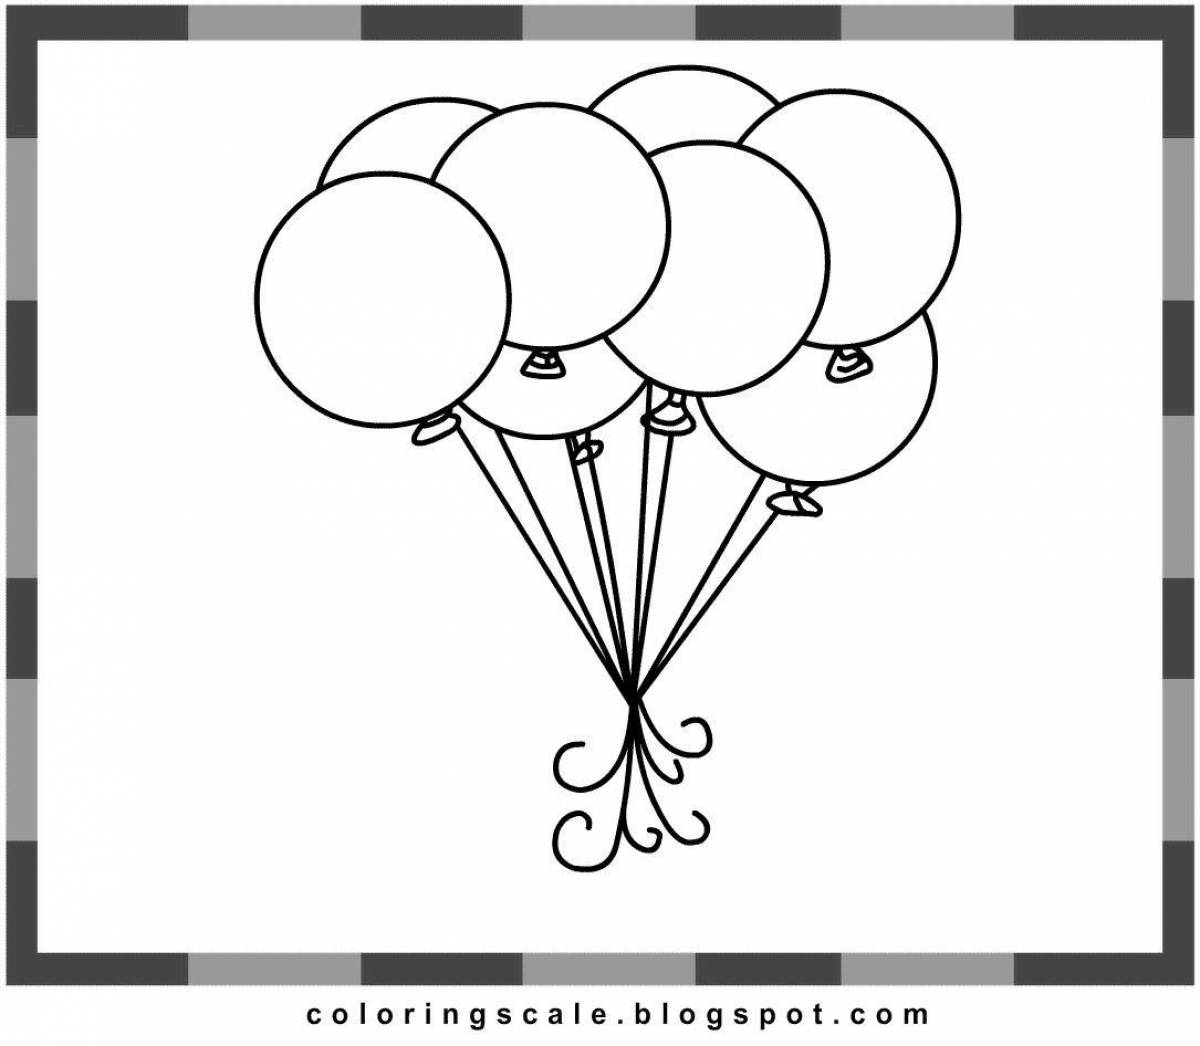 Coloring book bouquet of balloons